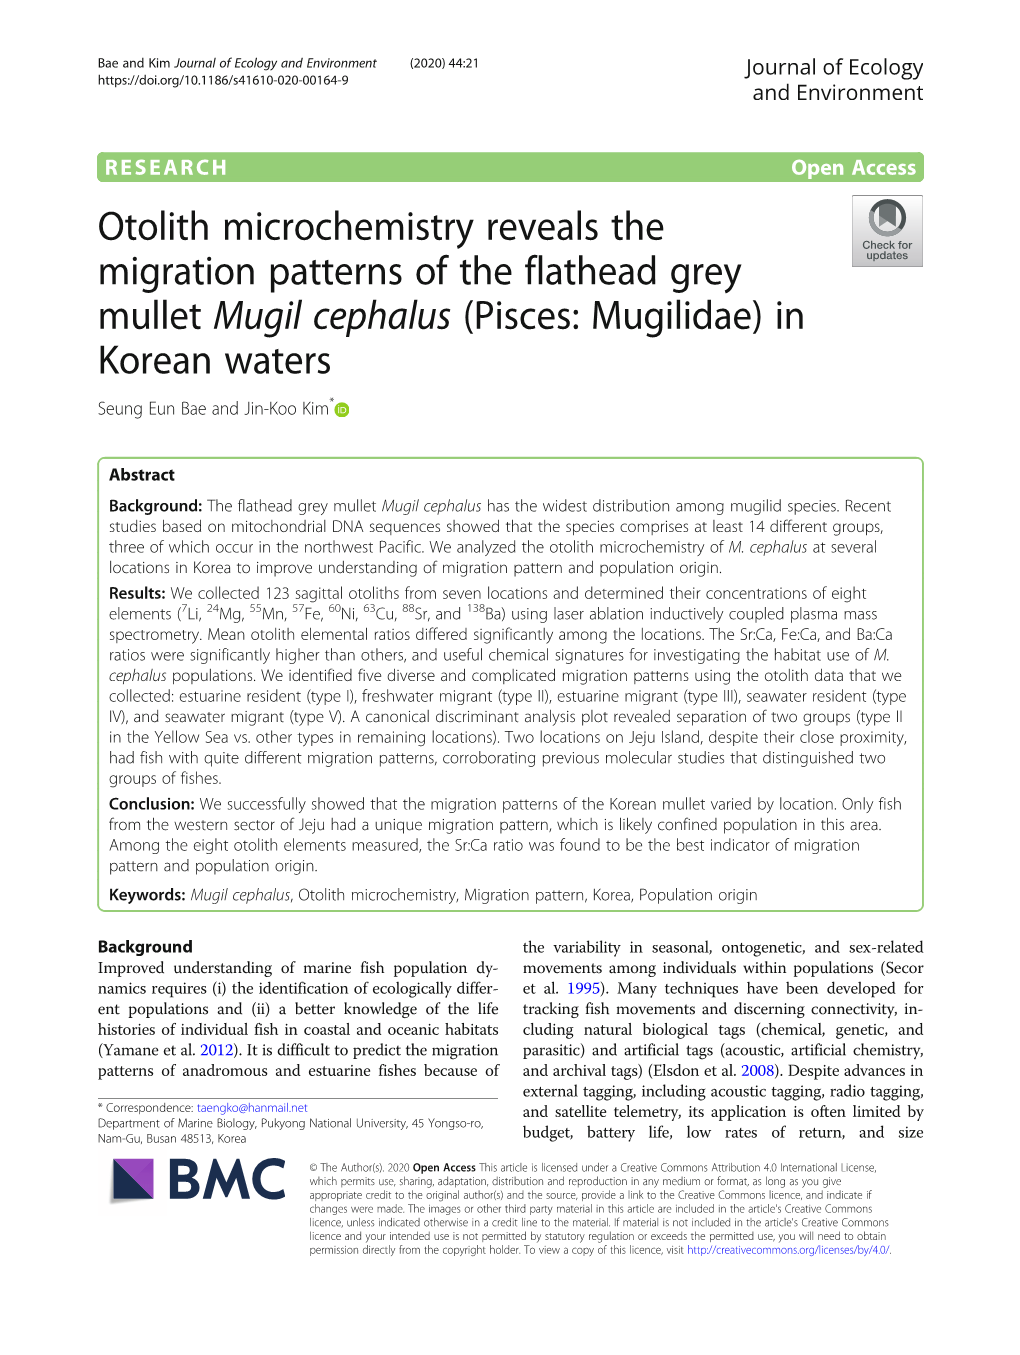 Otolith Microchemistry Reveals the Migration Patterns of the Flathead Grey Mullet Mugil Cephalus (Pisces: Mugilidae) in Korean Waters Seung Eun Bae and Jin-Koo Kim*